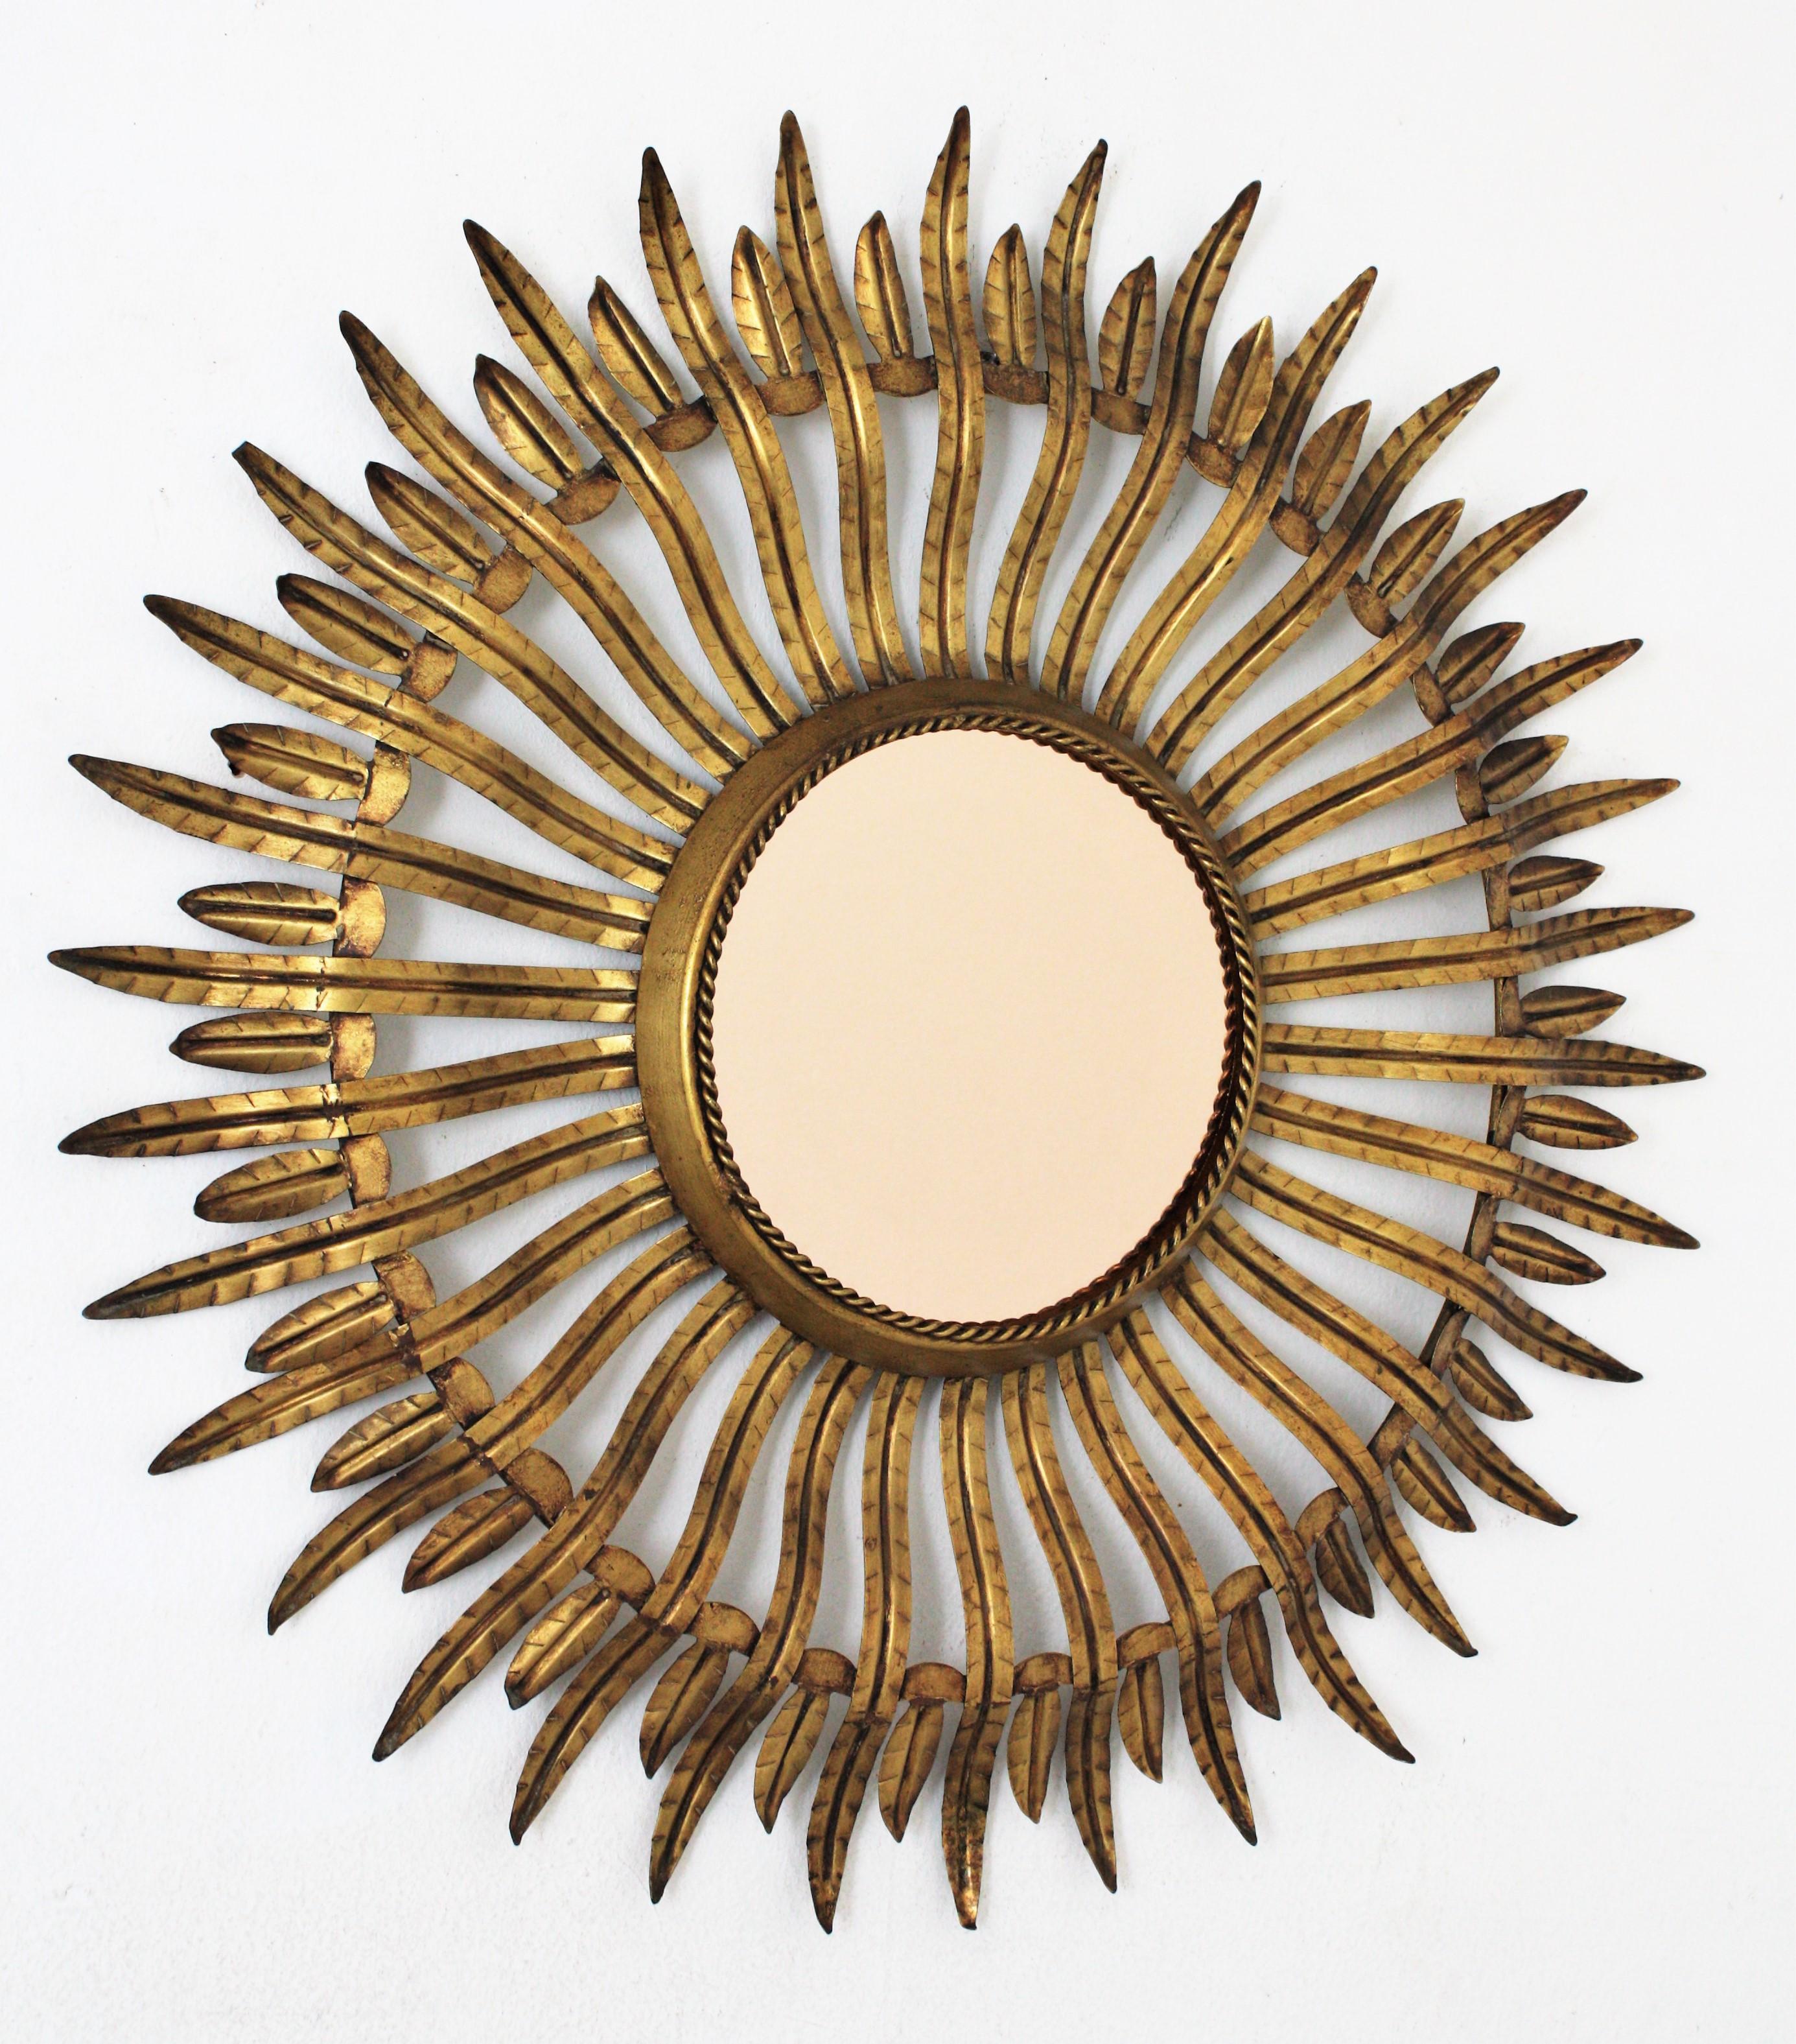 Round Sunburst mirror in Gilt Metal and Smoked Bronze Glass, Spain, 1960s
Beautiful gilt iron double layered sunburst mirror with smoked glass in bronze color.
This sunburst mirror features two layers of alternating long and short leaves